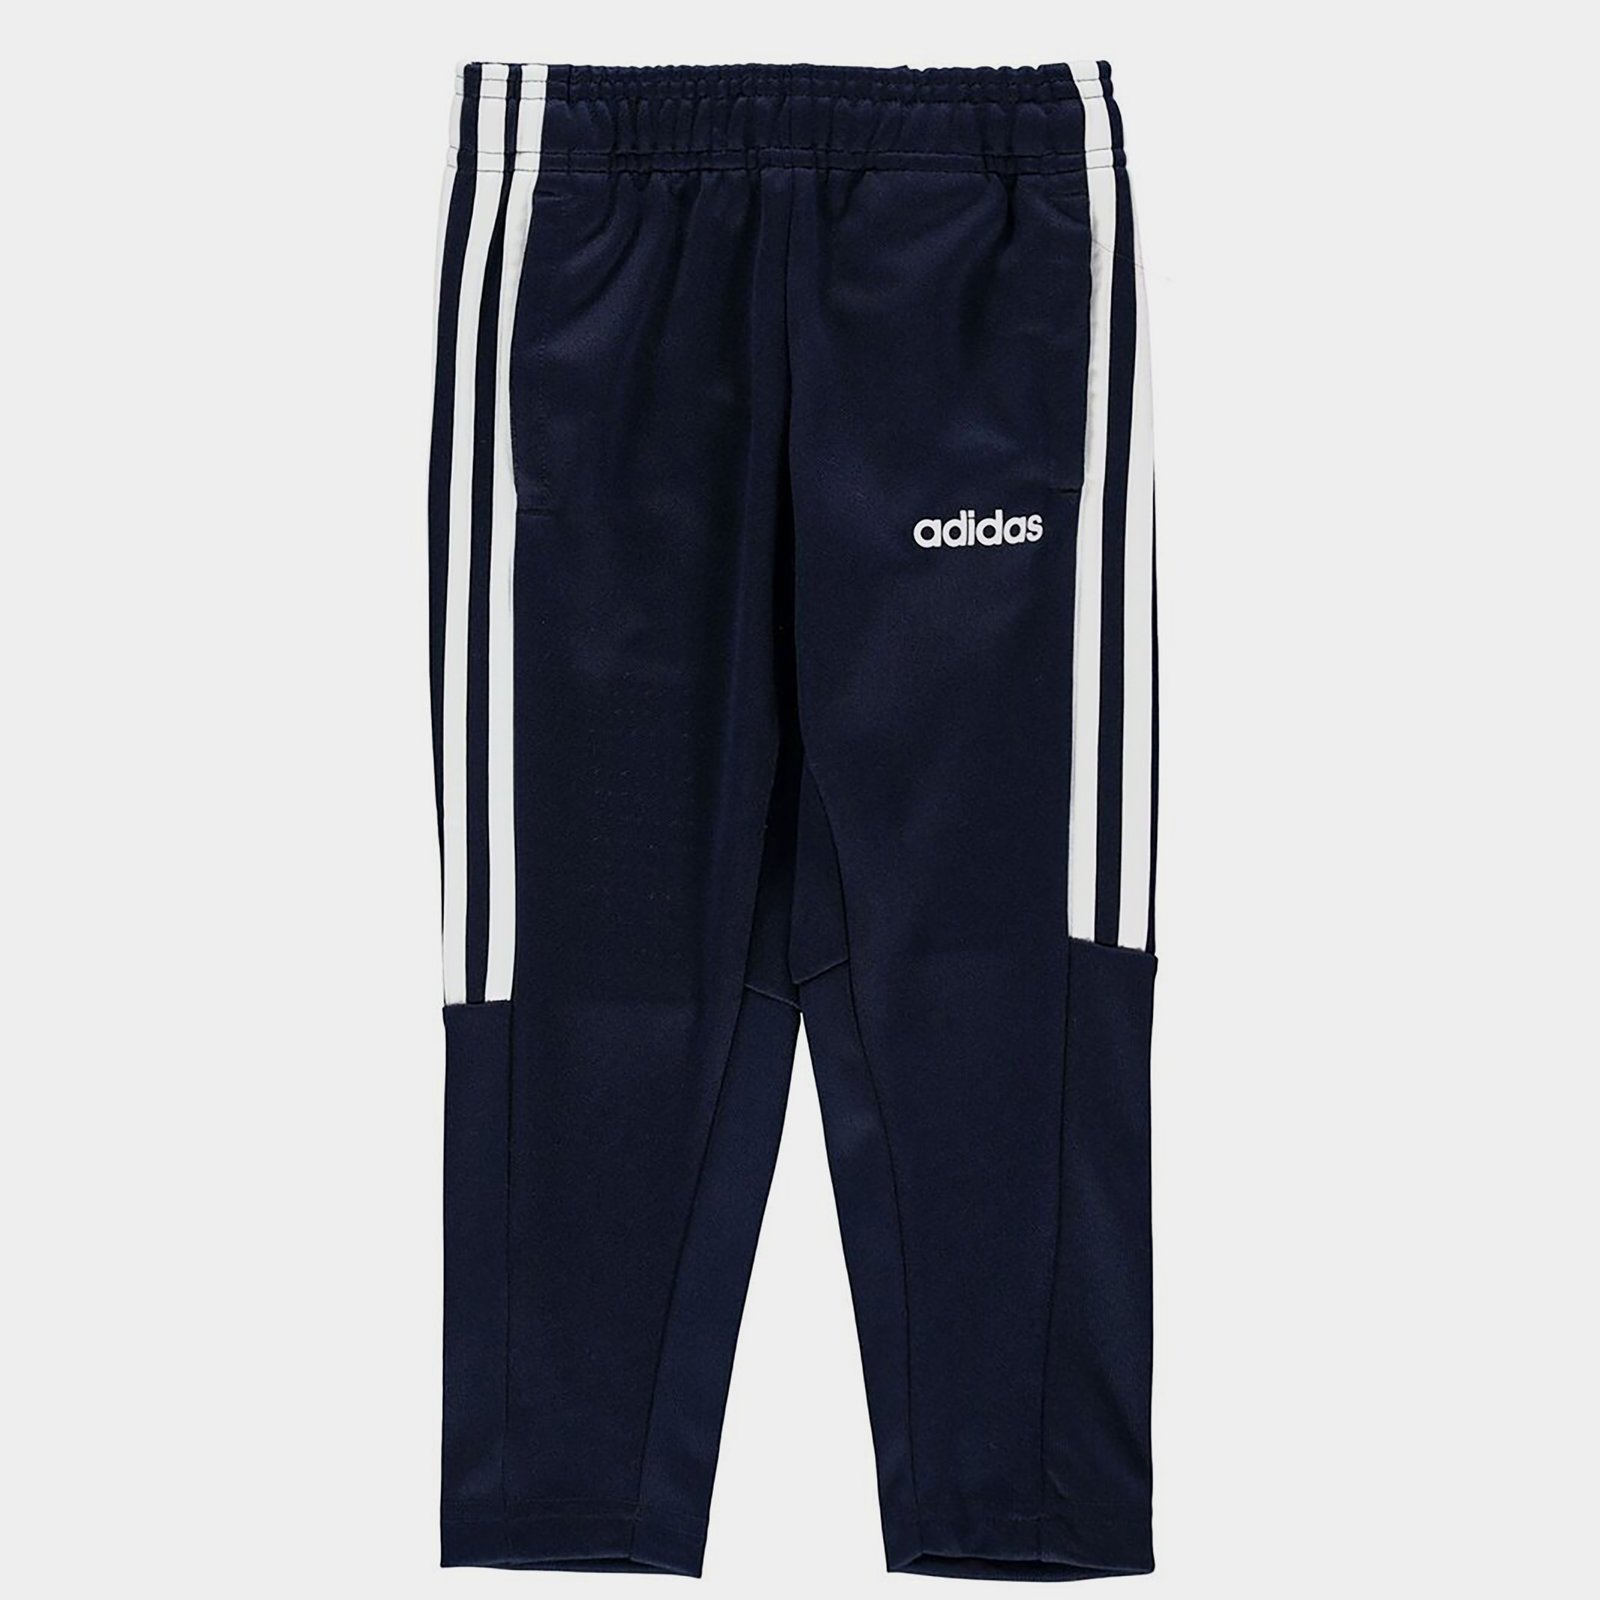 Sports and Leisure :: Sports material and equipment :: Sports Trousers ::  Adult Trousers Adidas Squadra 21 M Blue Men